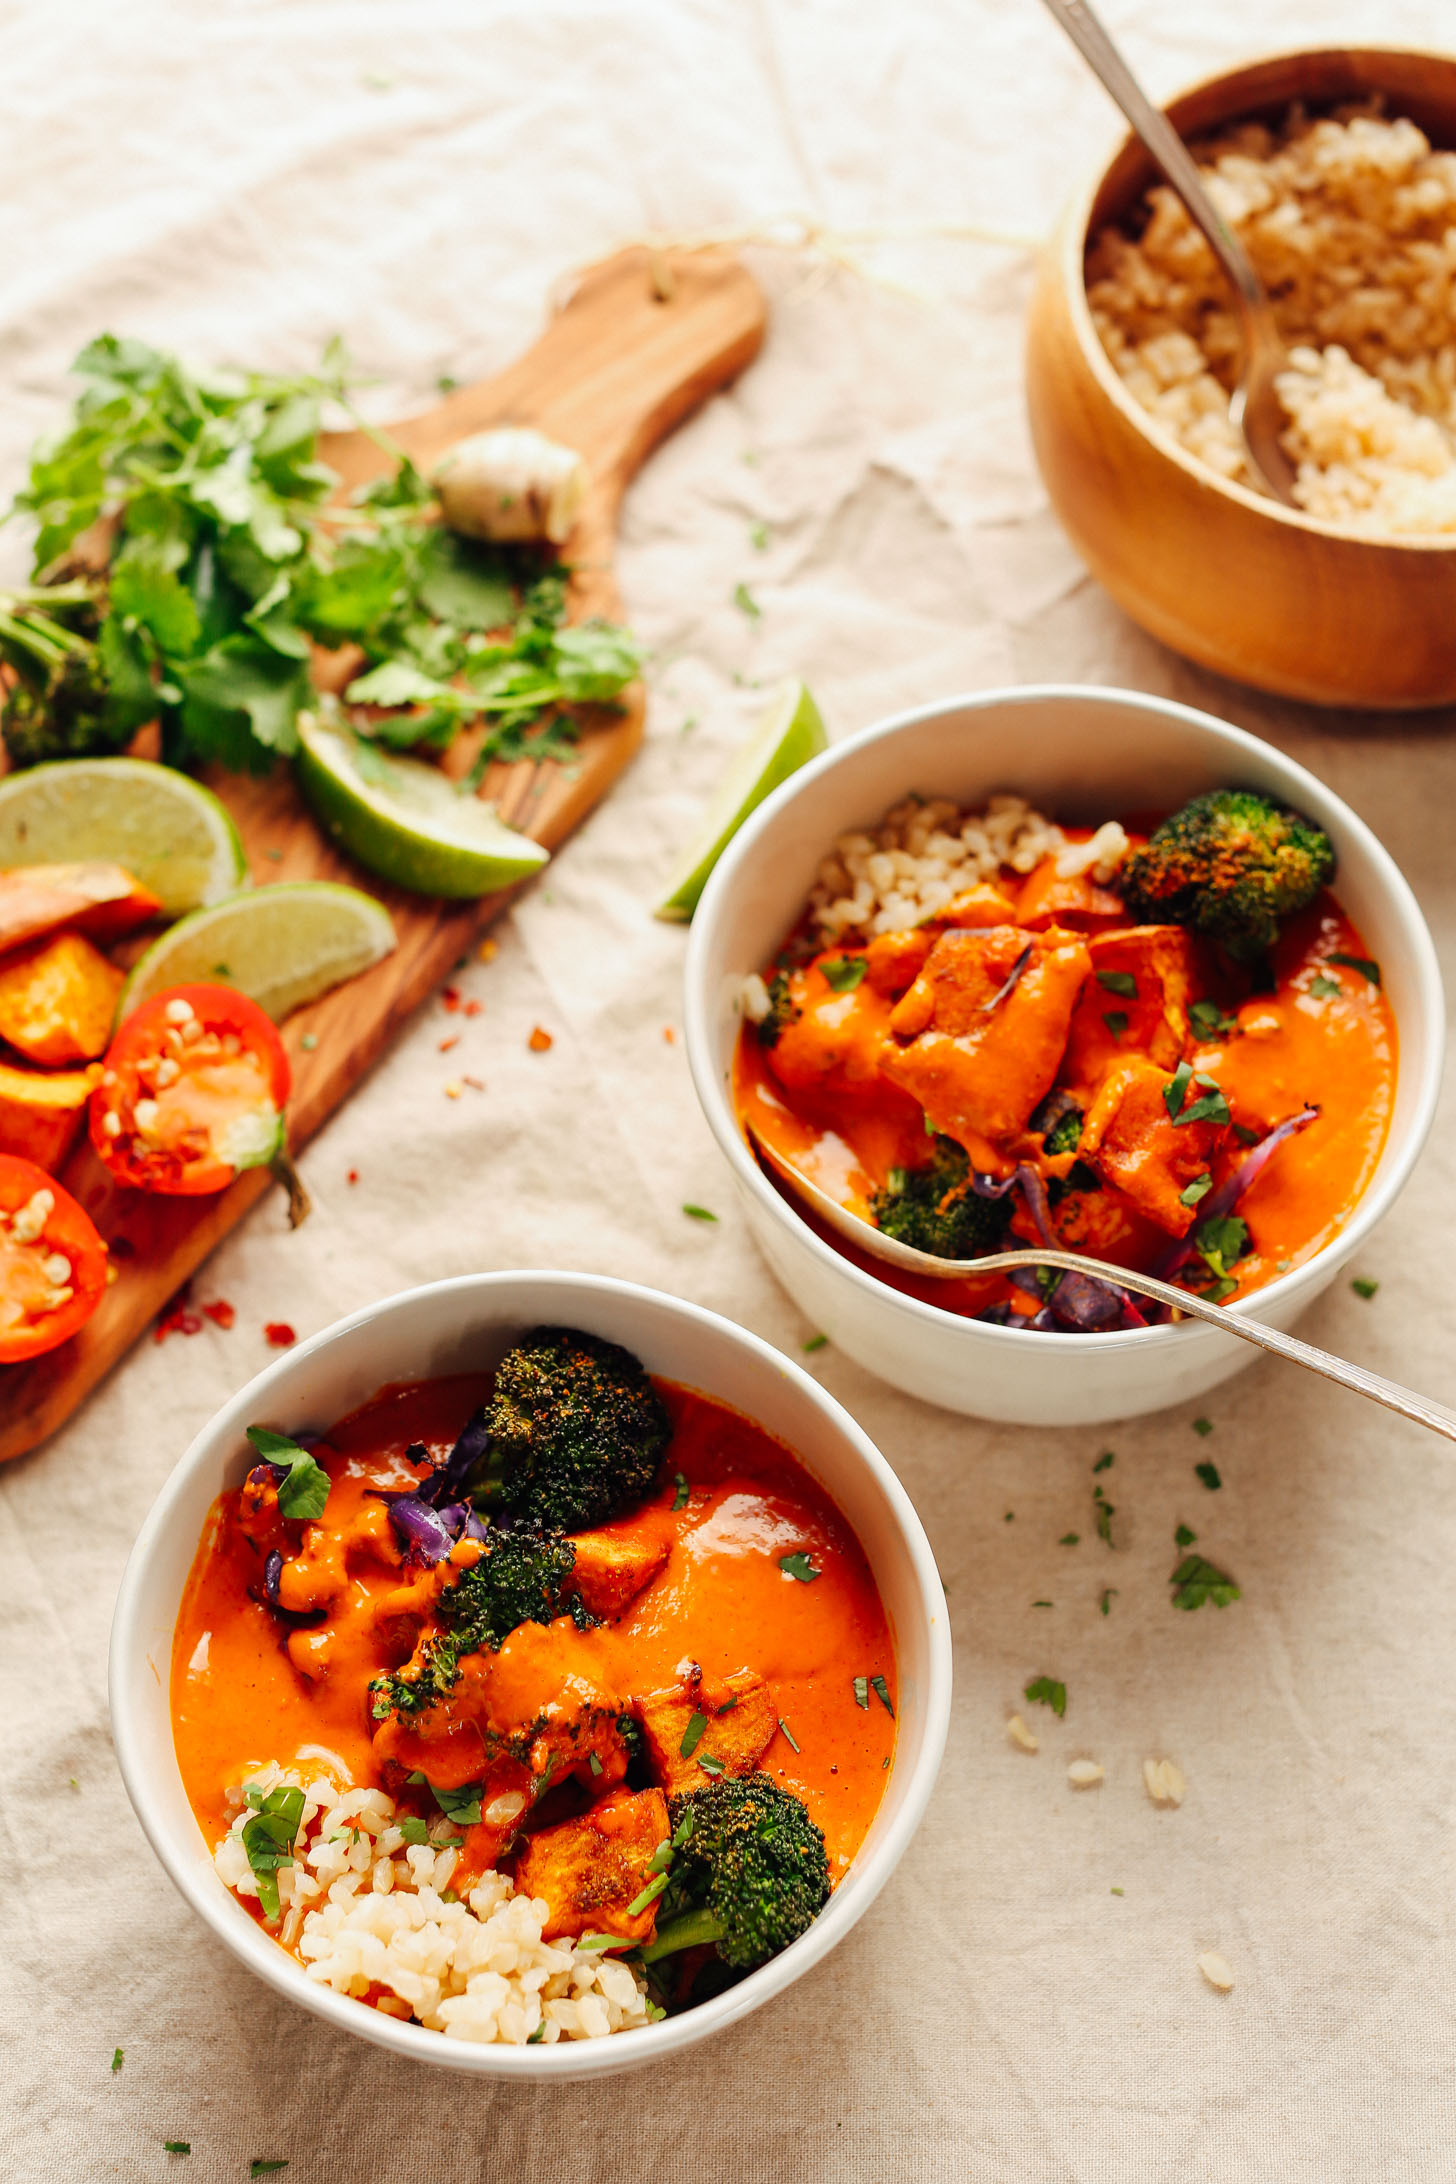 Bowls of Rich Red Curry with Roasted Vegetables served with brown rice for a delicious plant-based meal